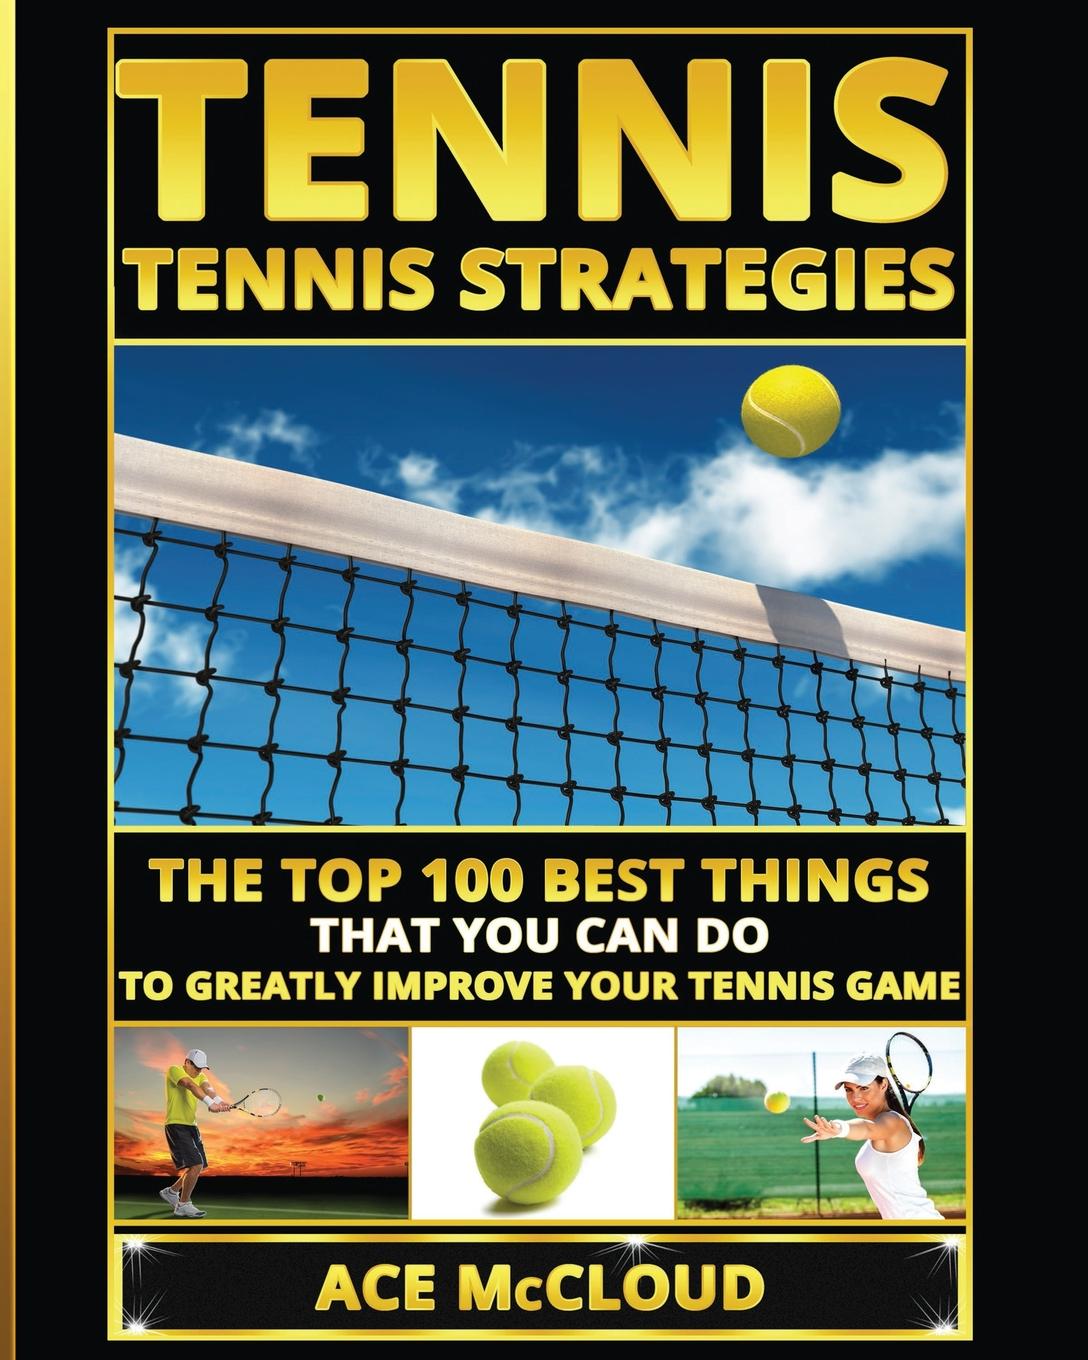 Ace McCloud Tennis. Tennis Strategies: The Top 100 Best Things That You Can Do To Greatly Improve Your Tennis Game